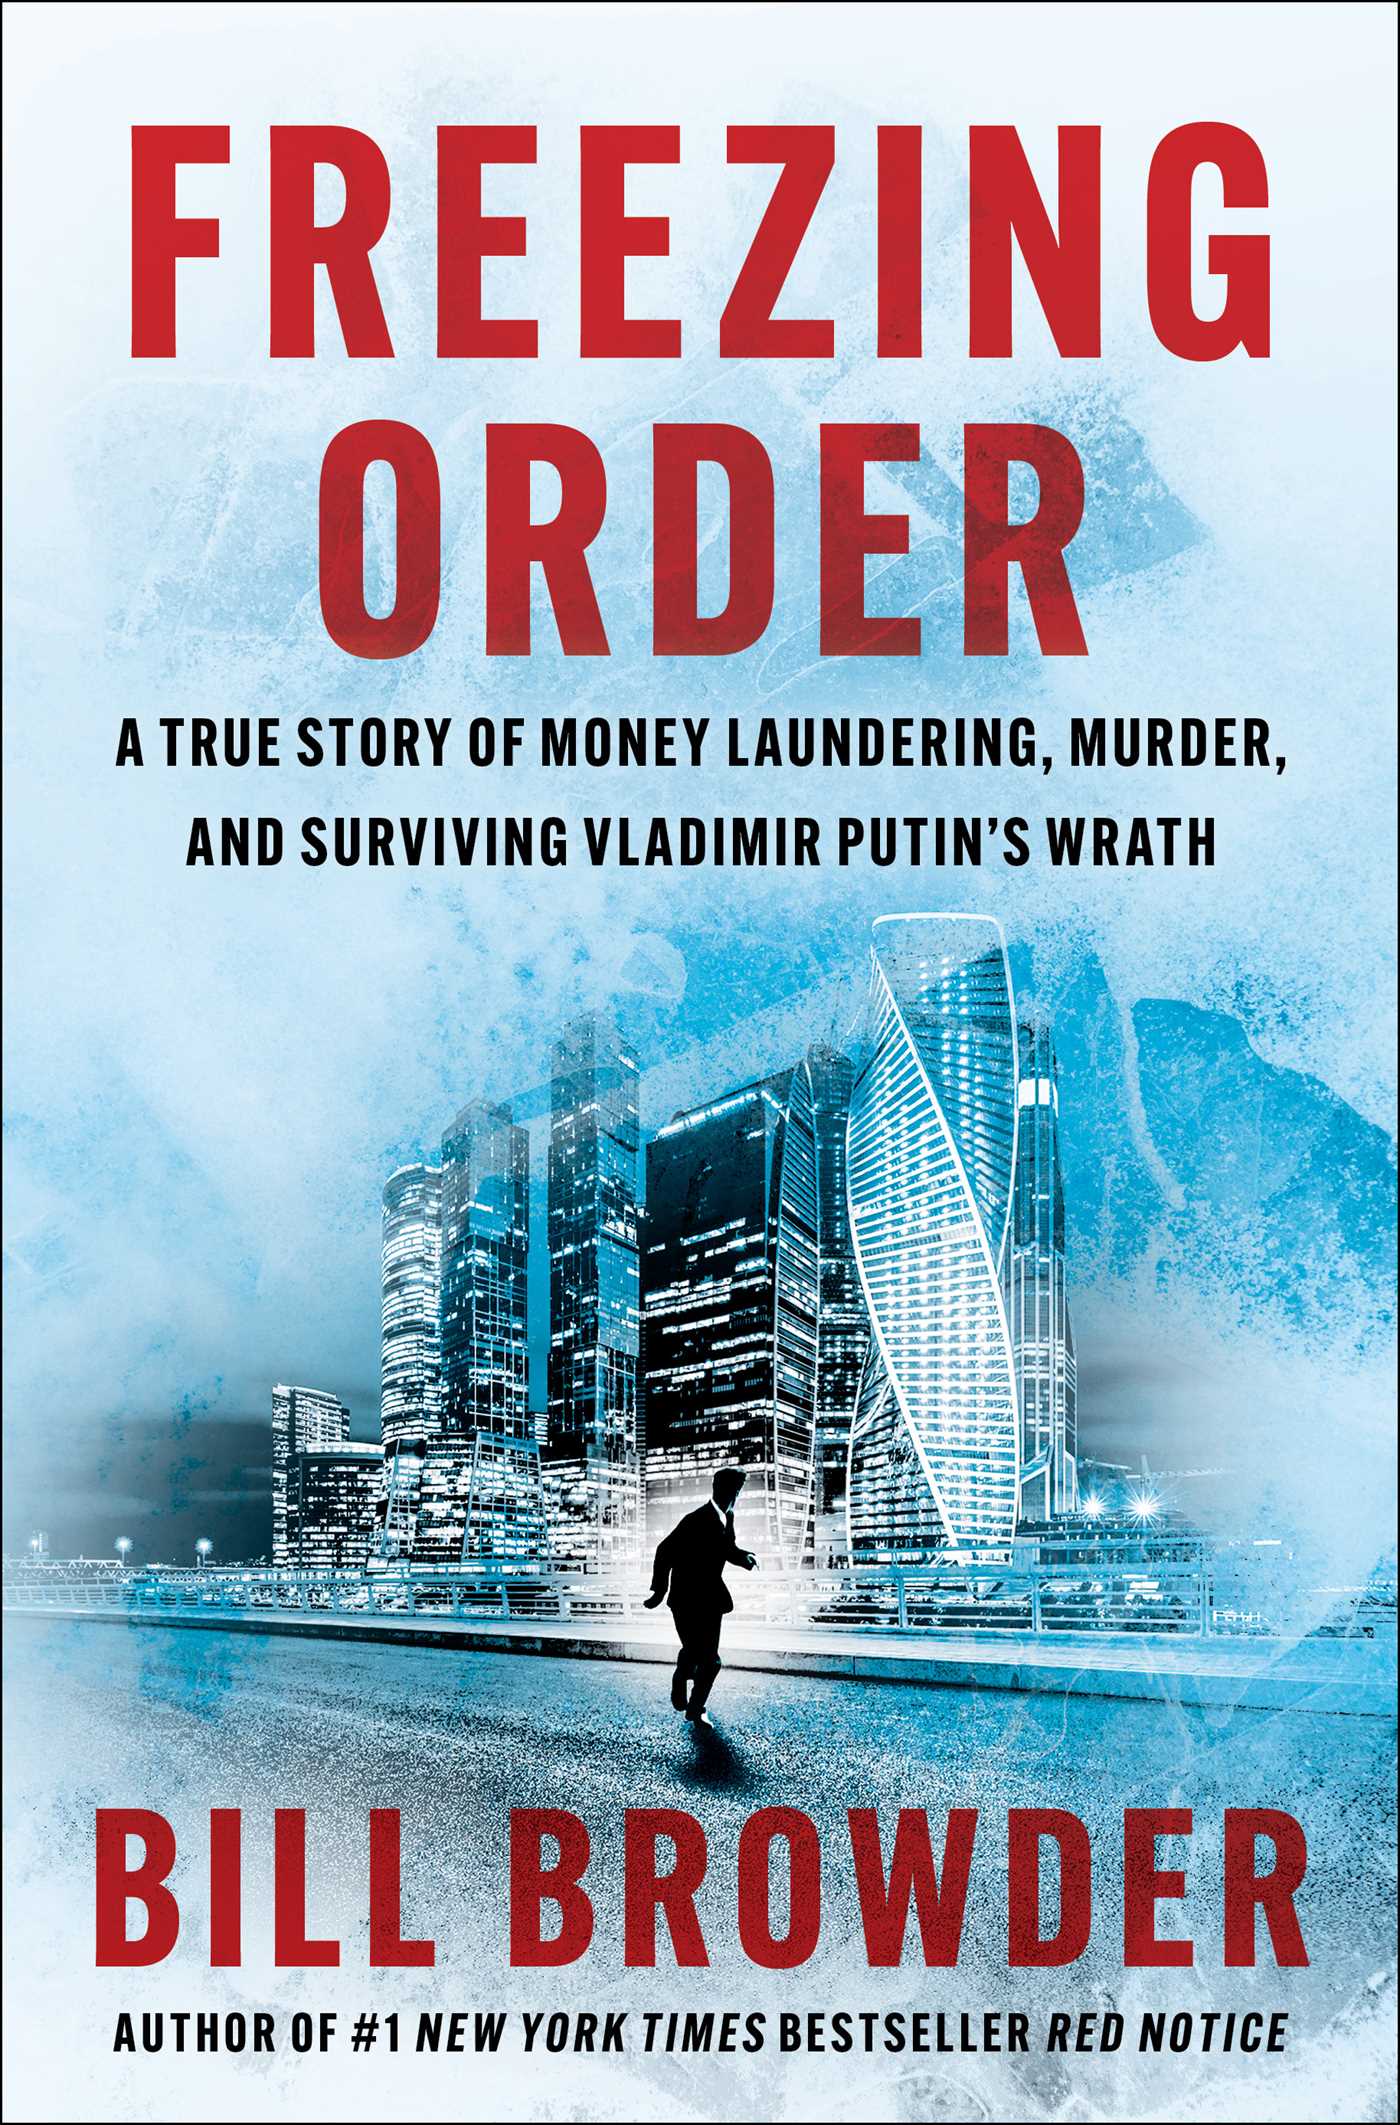 Image of the book cover Freezing Order: A True Story of Russian Money Laundering, Murder, and Surviving Vladimir Putin's Wrath by Bill Browder